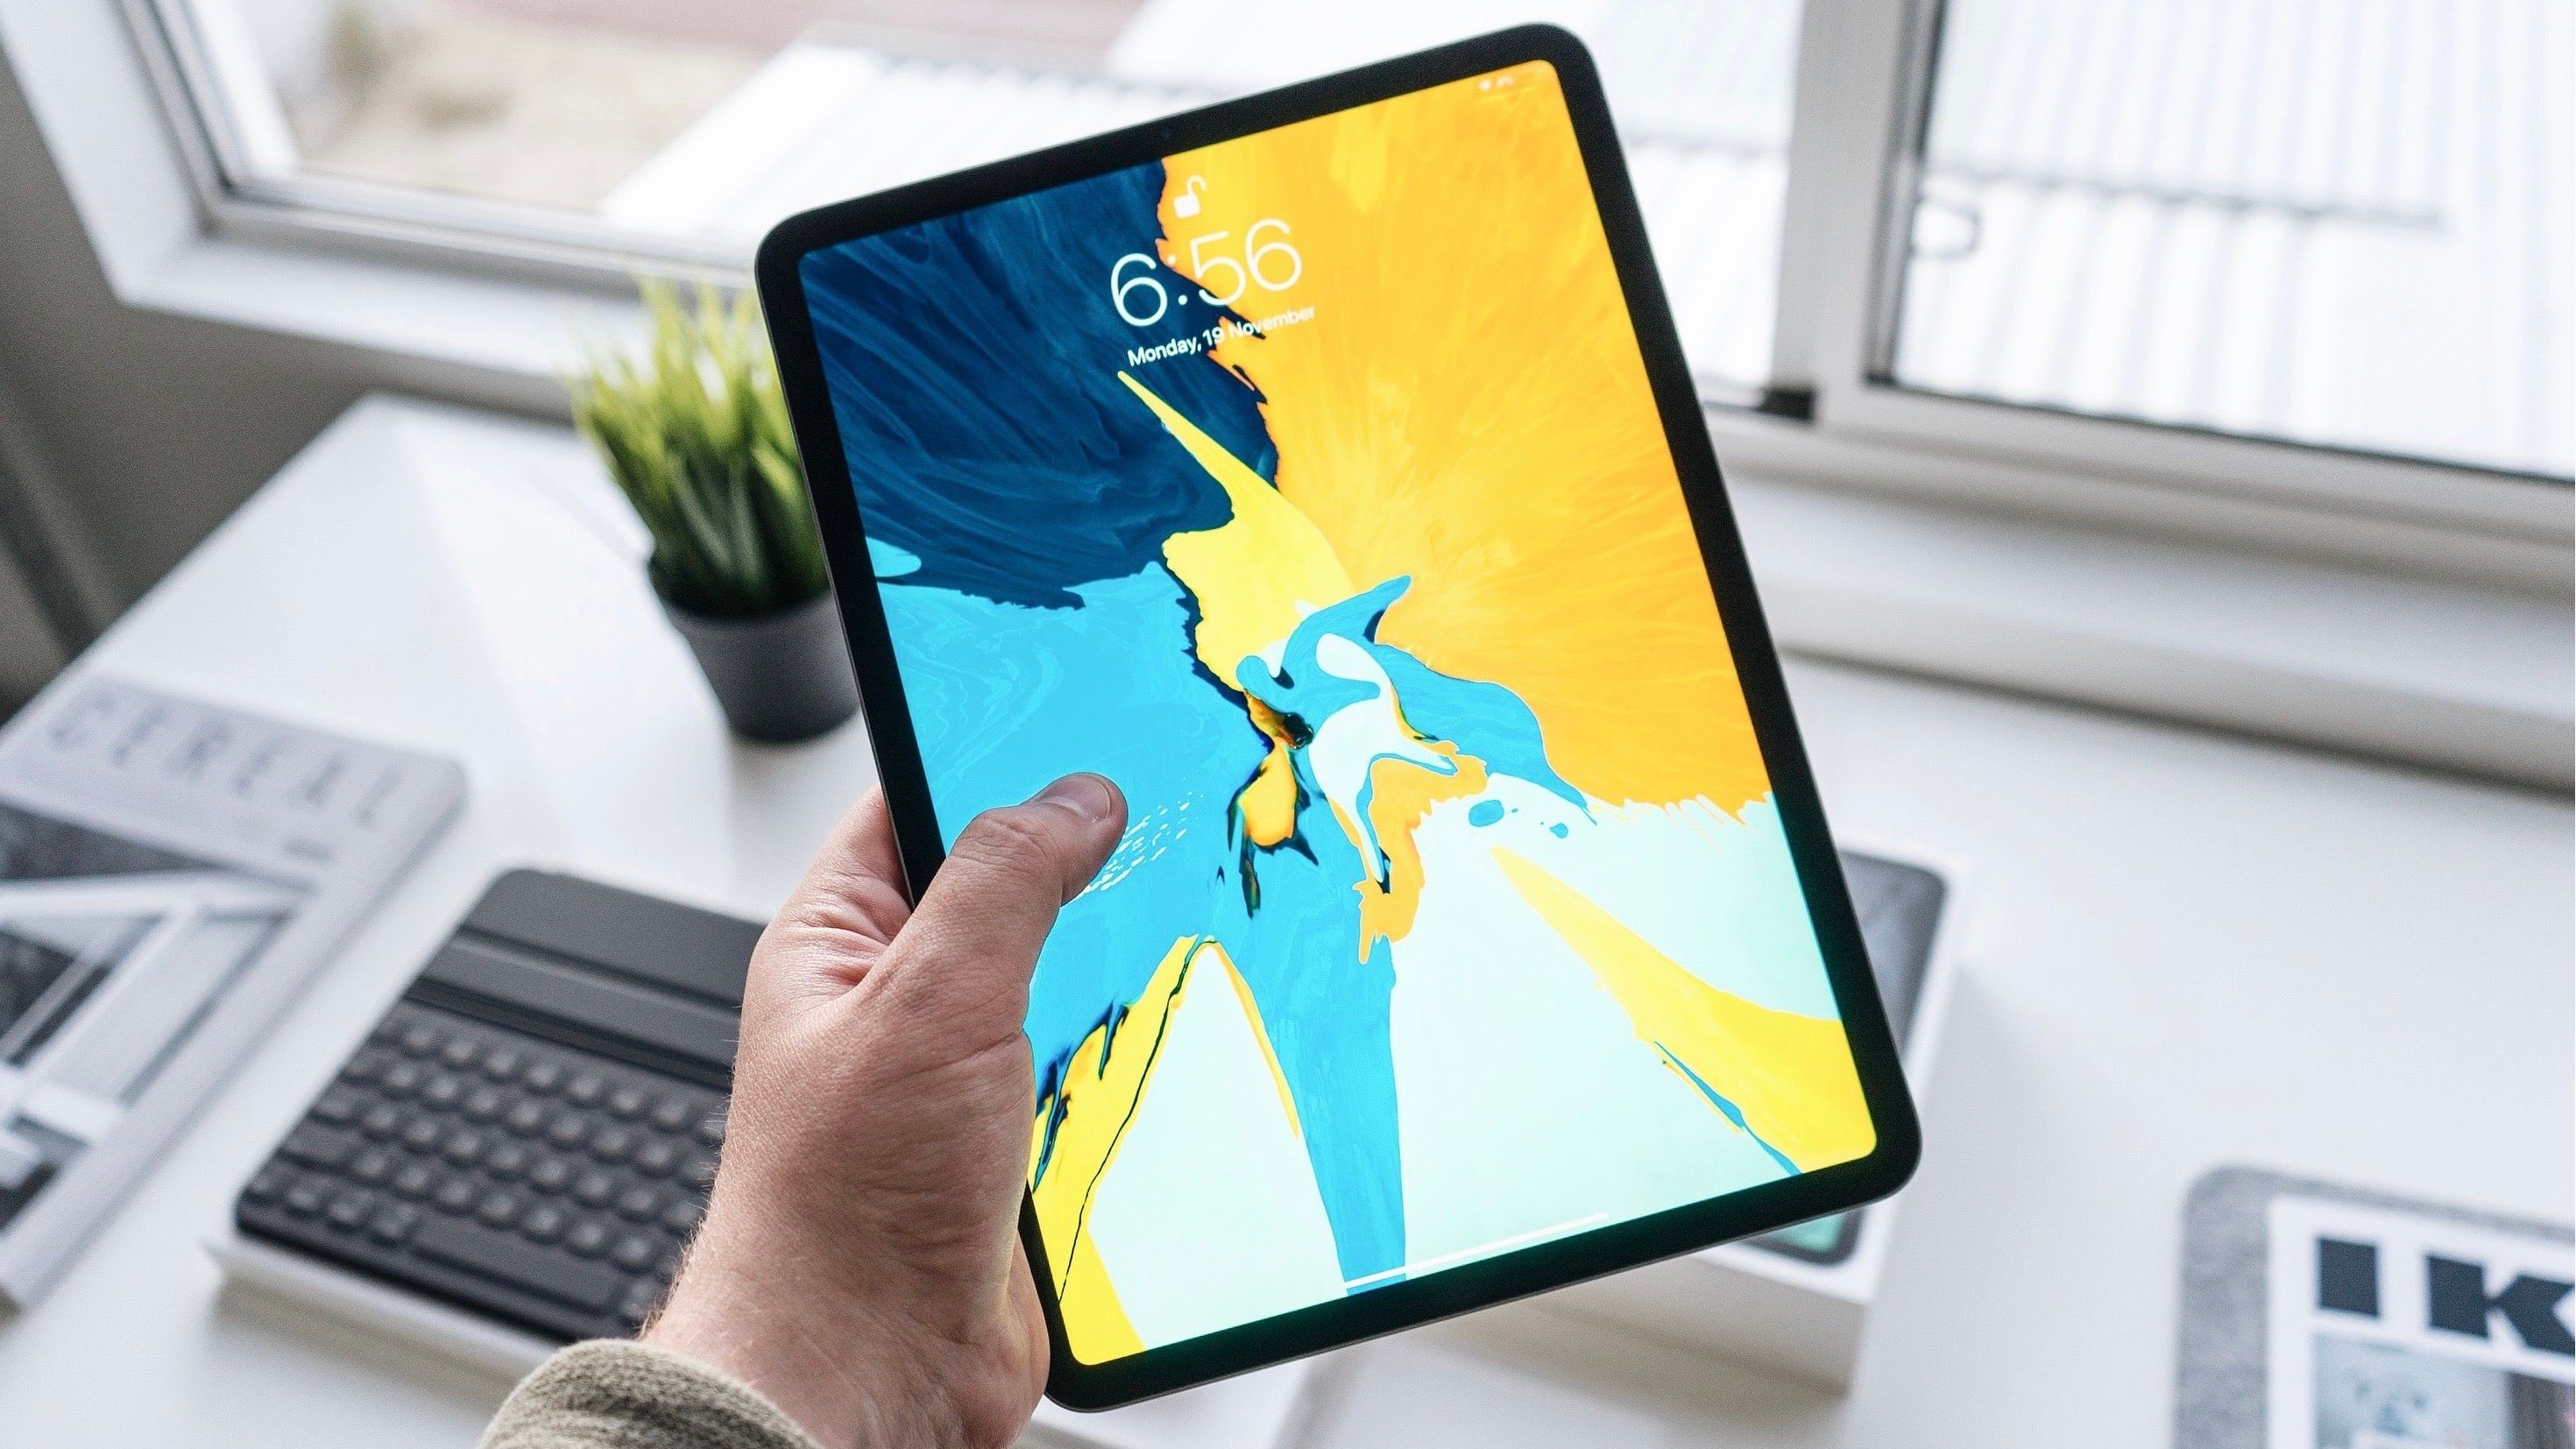 iPad Pro vs Macbook Pro: Is the iPad able to replace a Macbook?